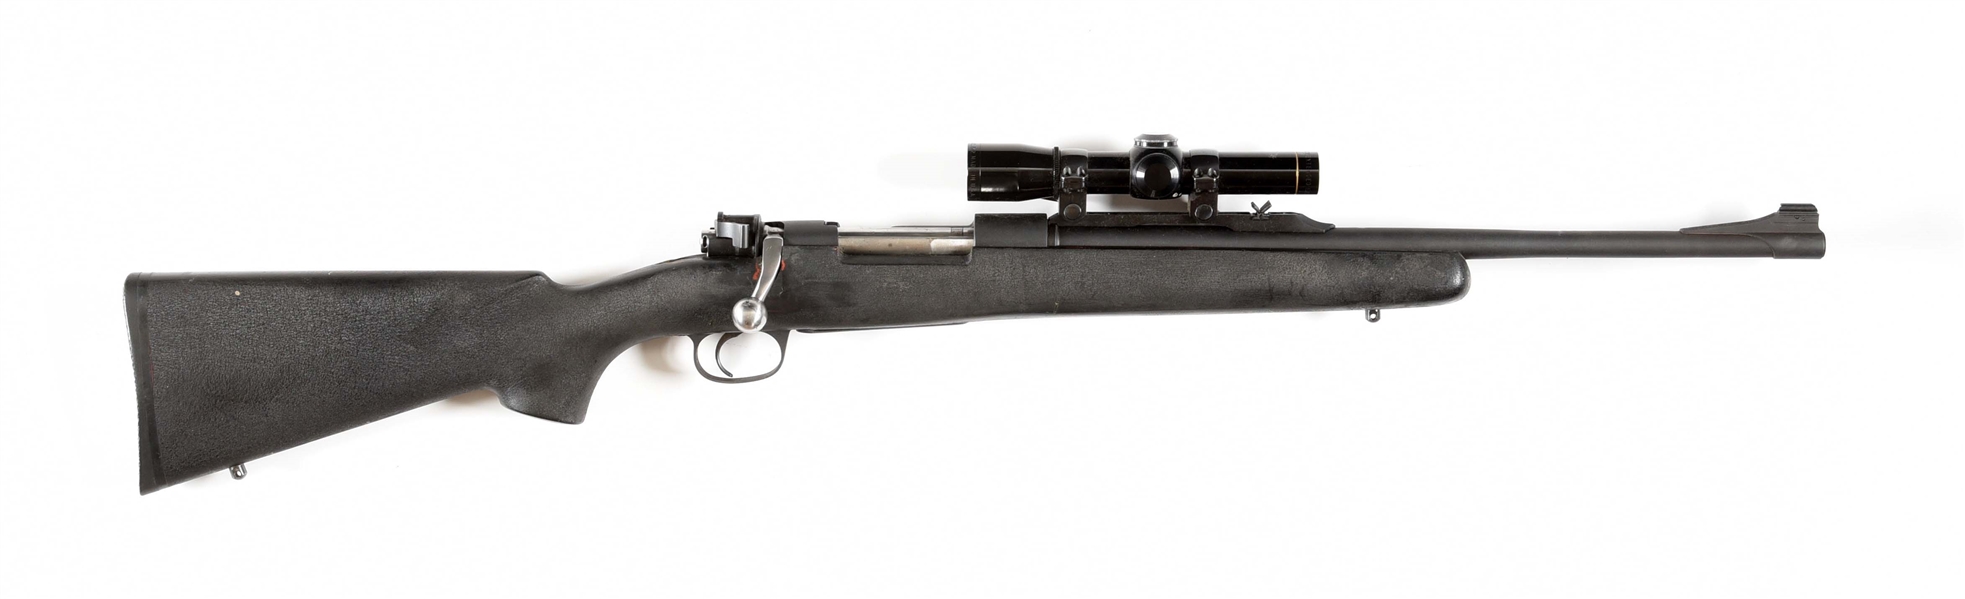 (M) FN MAUSER SCOUT BOLT ACTION RIFLE 